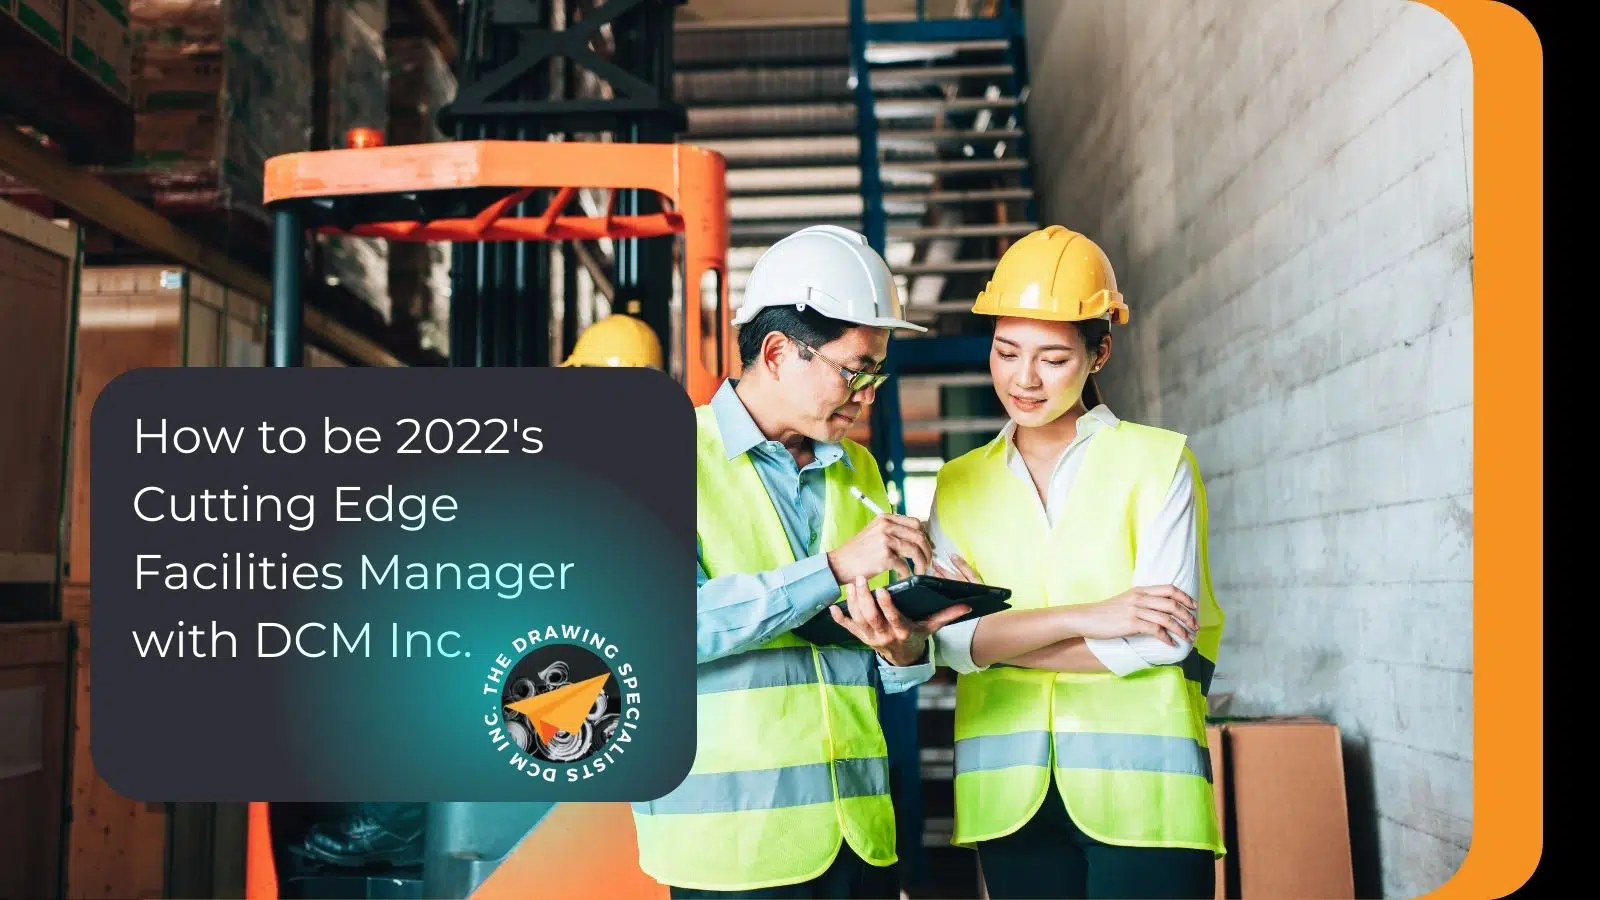 How to be 2022’s Cutting Edge Facility Manager with DCM Inc.